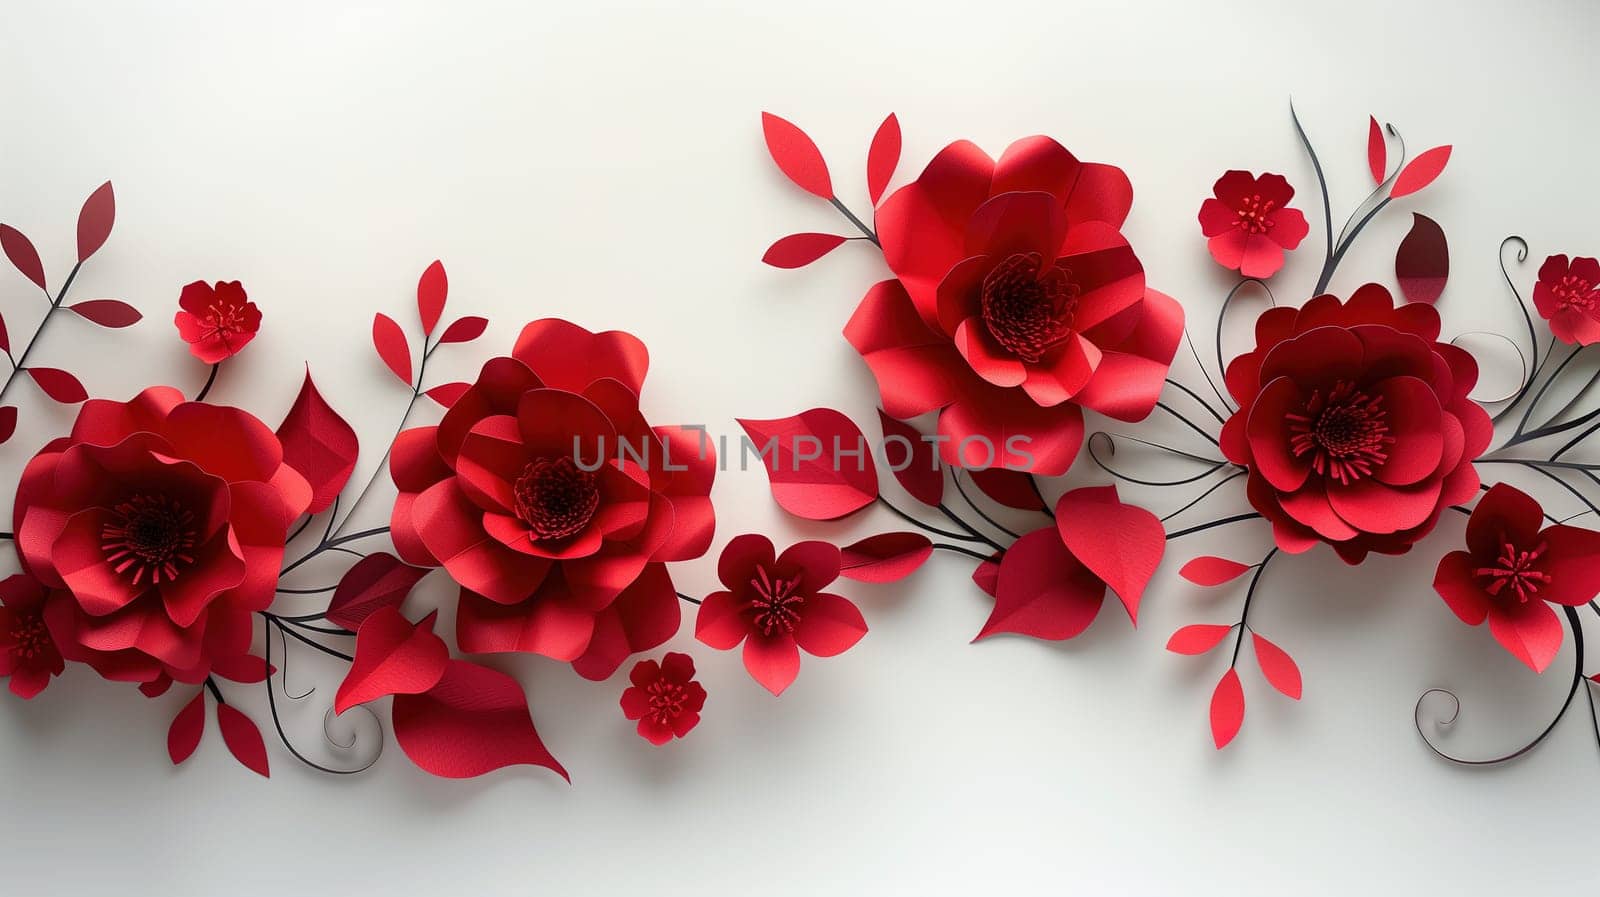 A cluster of vibrant red paper flowers arranged neatly on a pristine white wall. The bold color of the flowers pops against the clean background, creating a striking visual contrast.